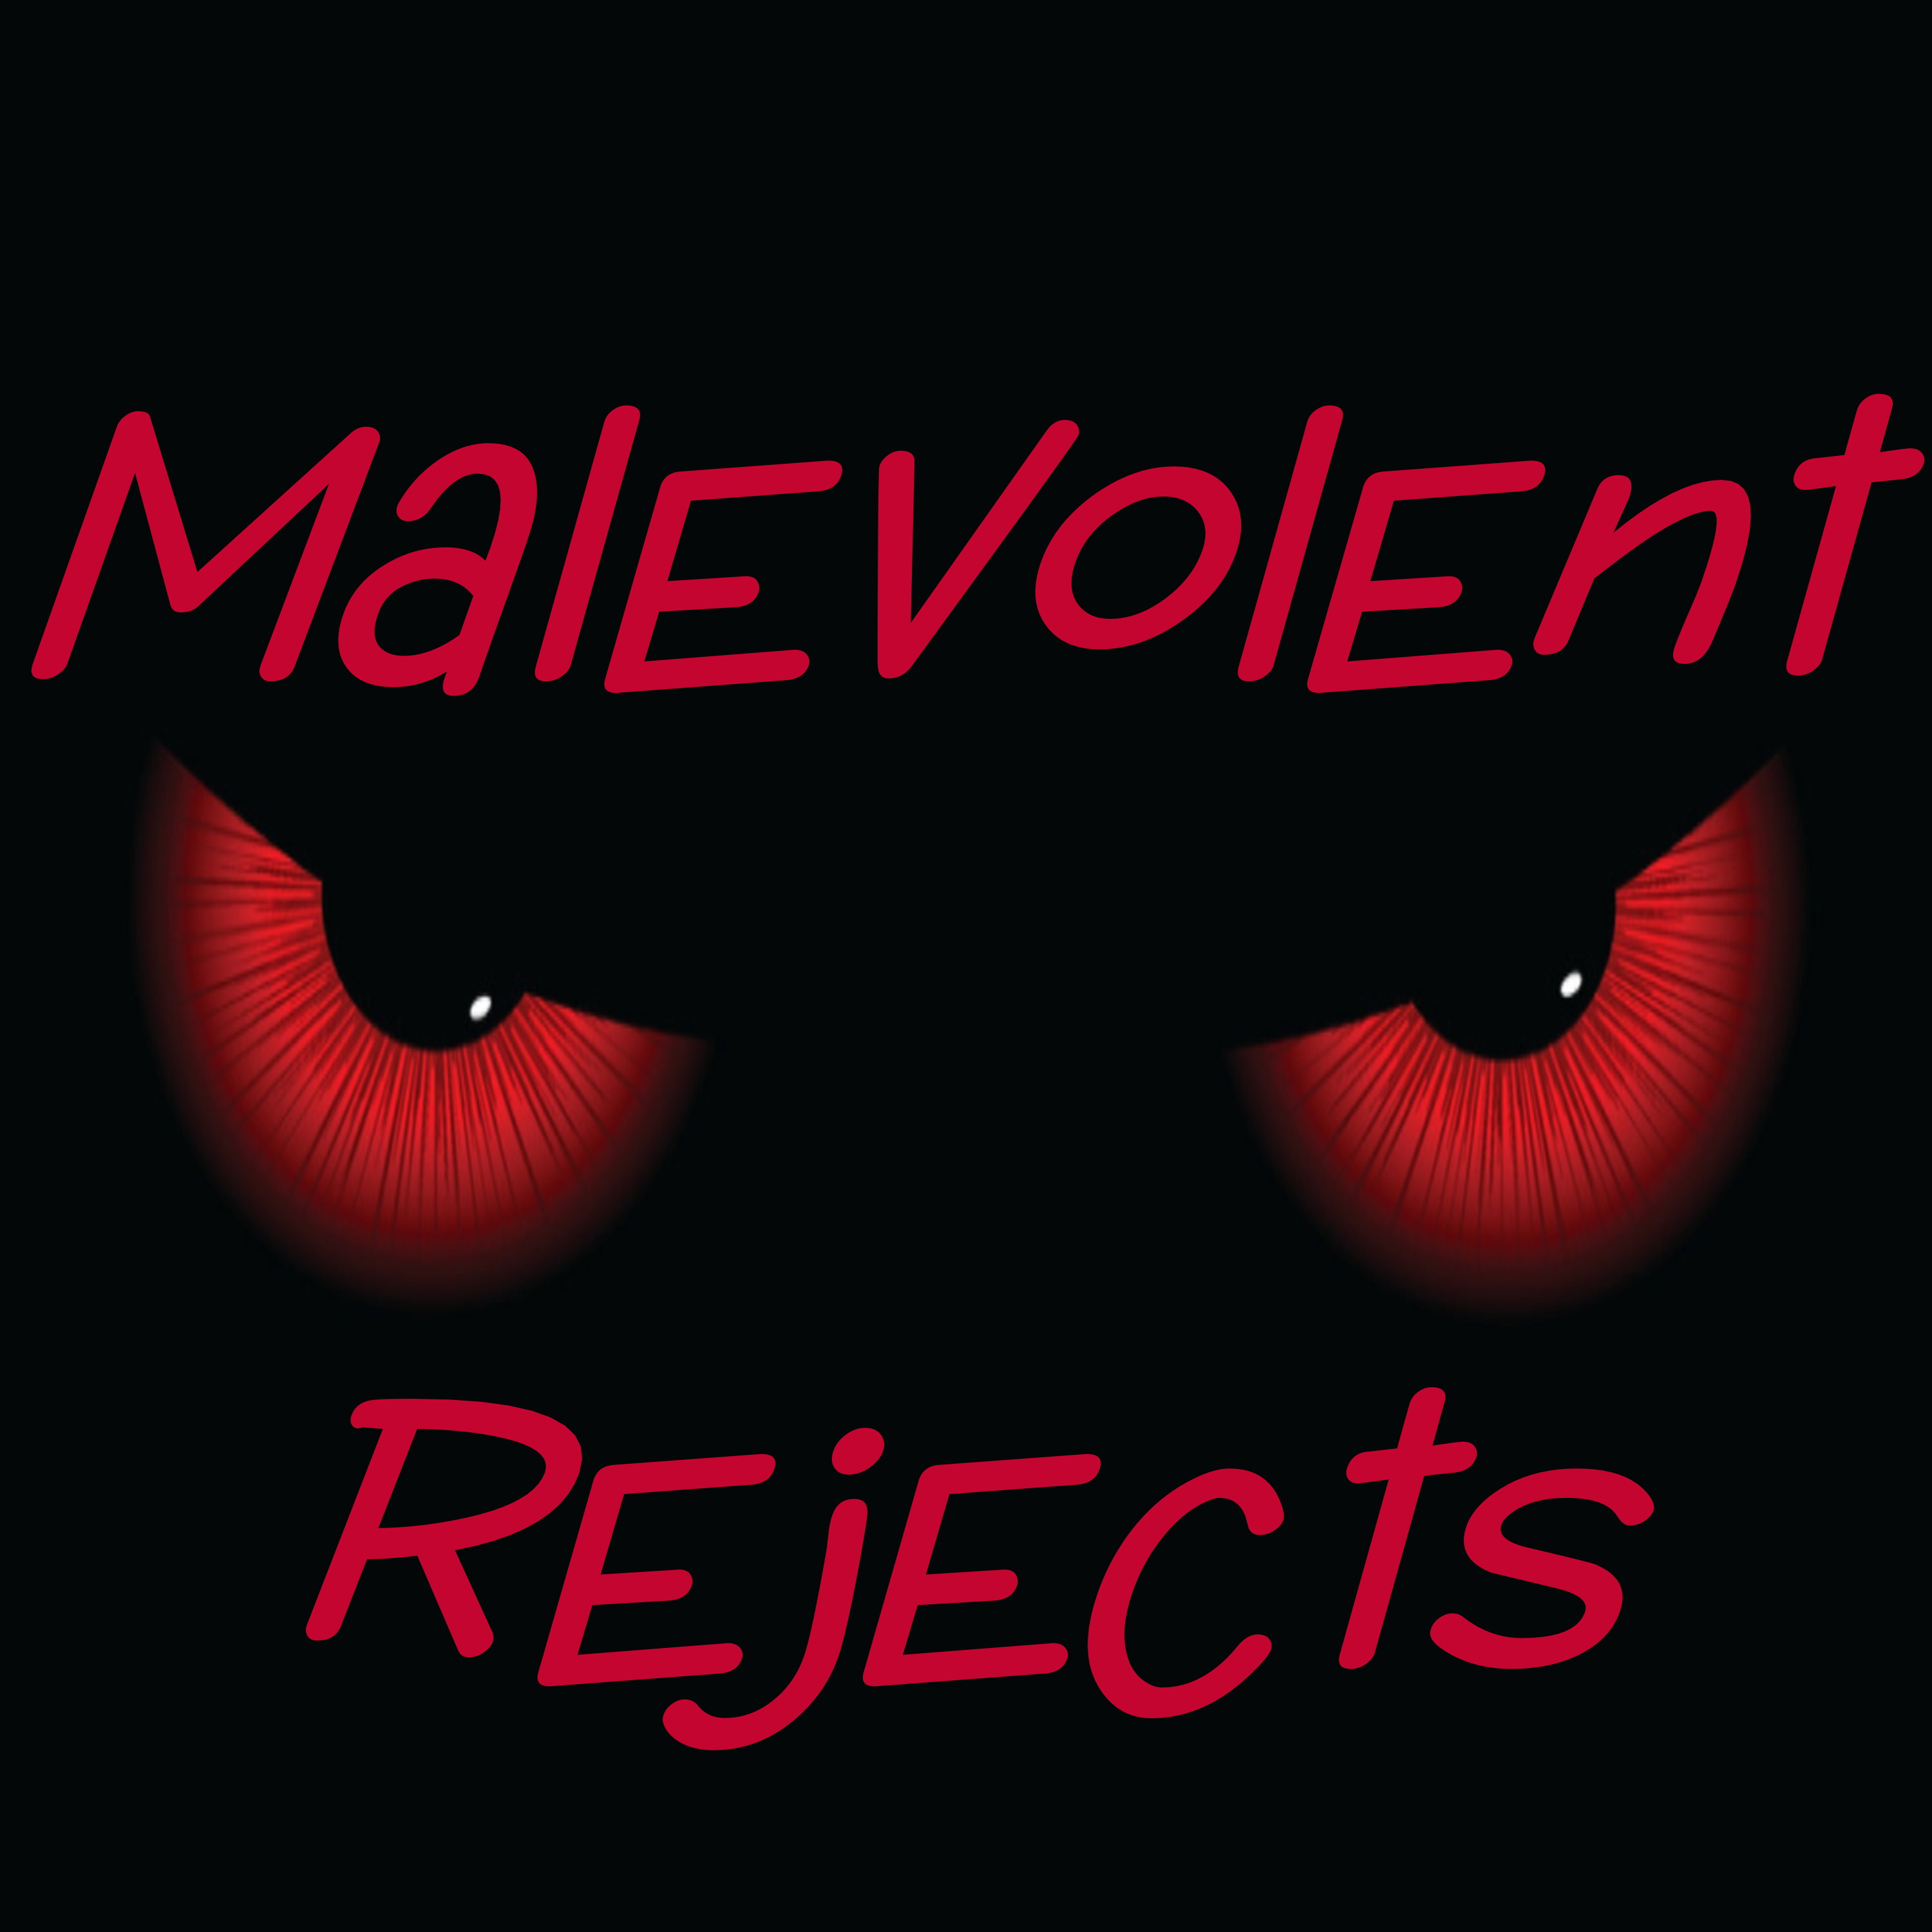 Art for Morning by Malevolent Rejects